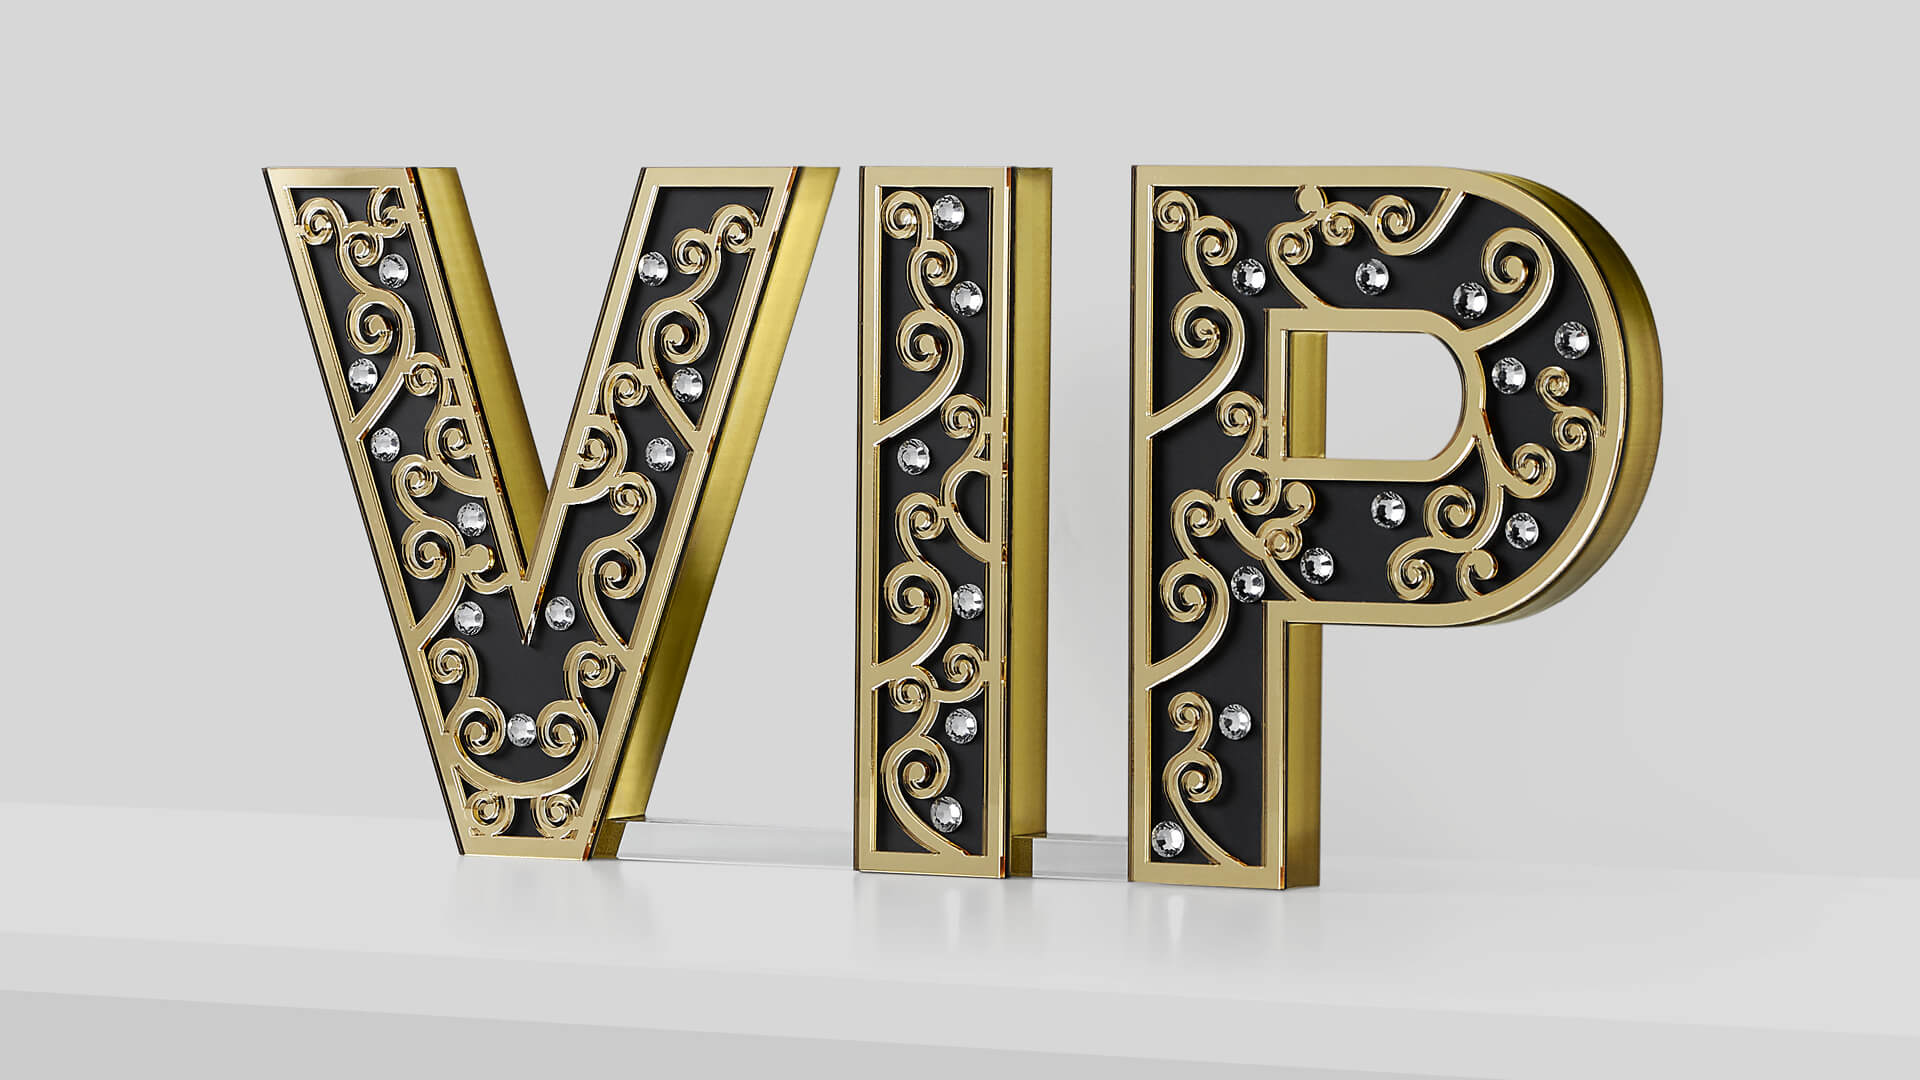 vip letters - pretty-vip-letters-space-letters-vip-letters-vip-decorative-letters-vip